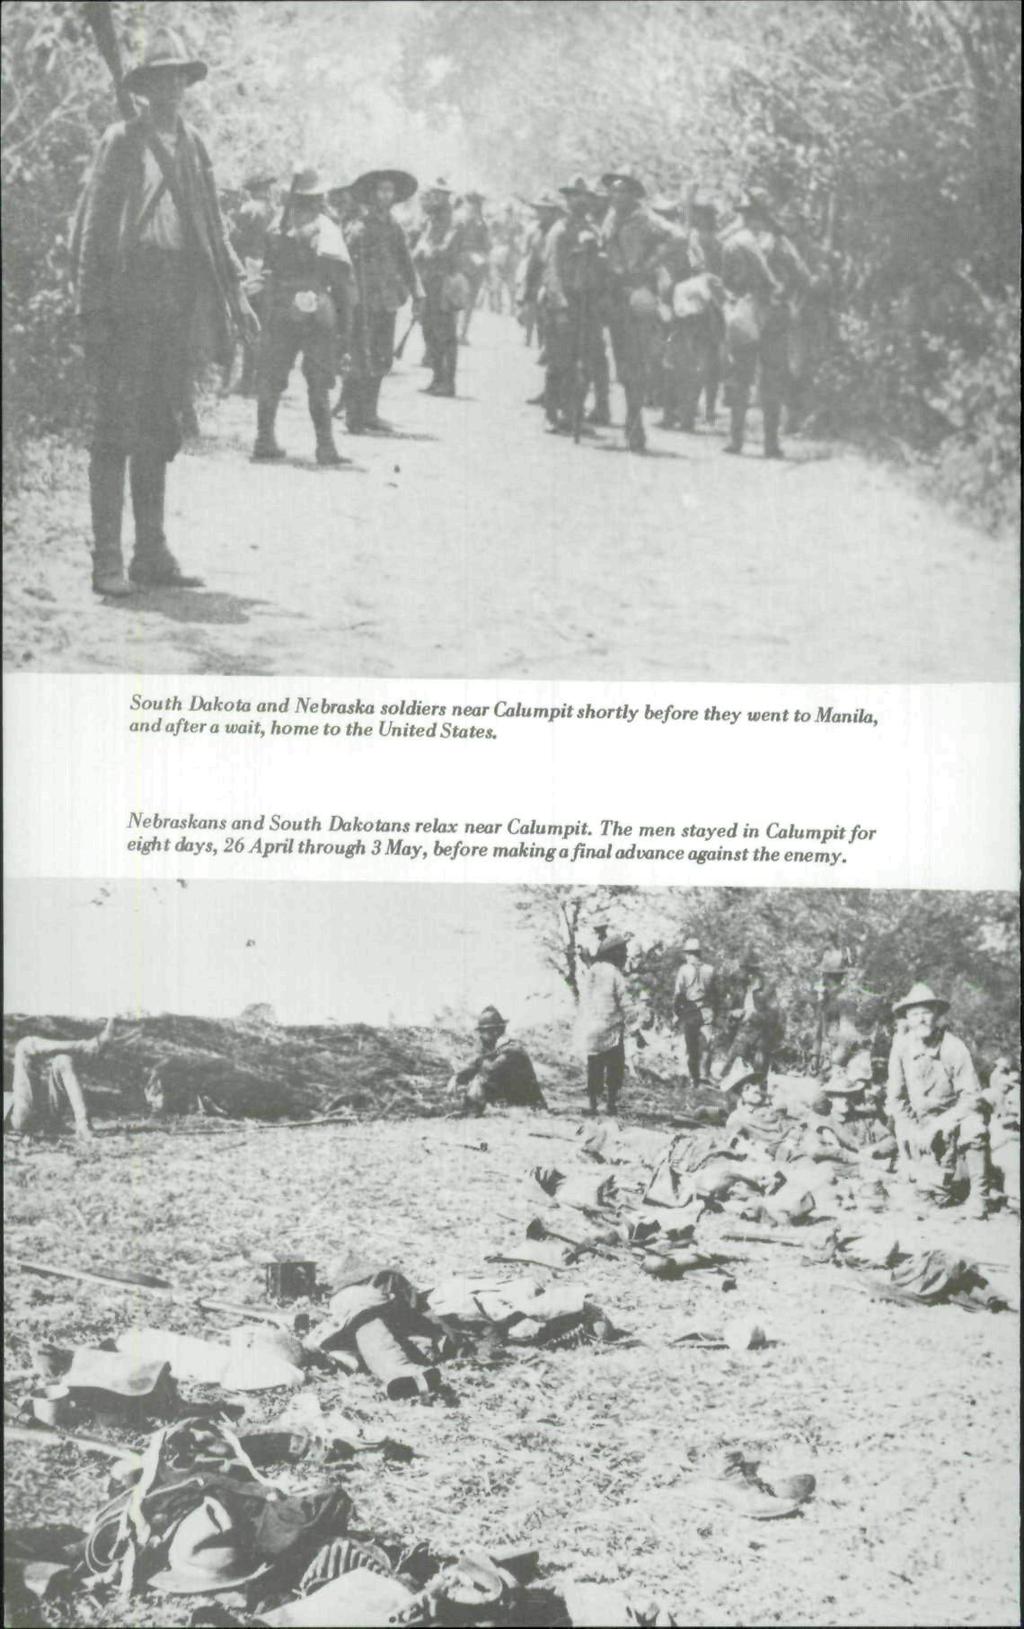 South Dakota and Nebraska soldiers near Calumpitshortly before they wenttomanila and after a toatt, home to the United States.